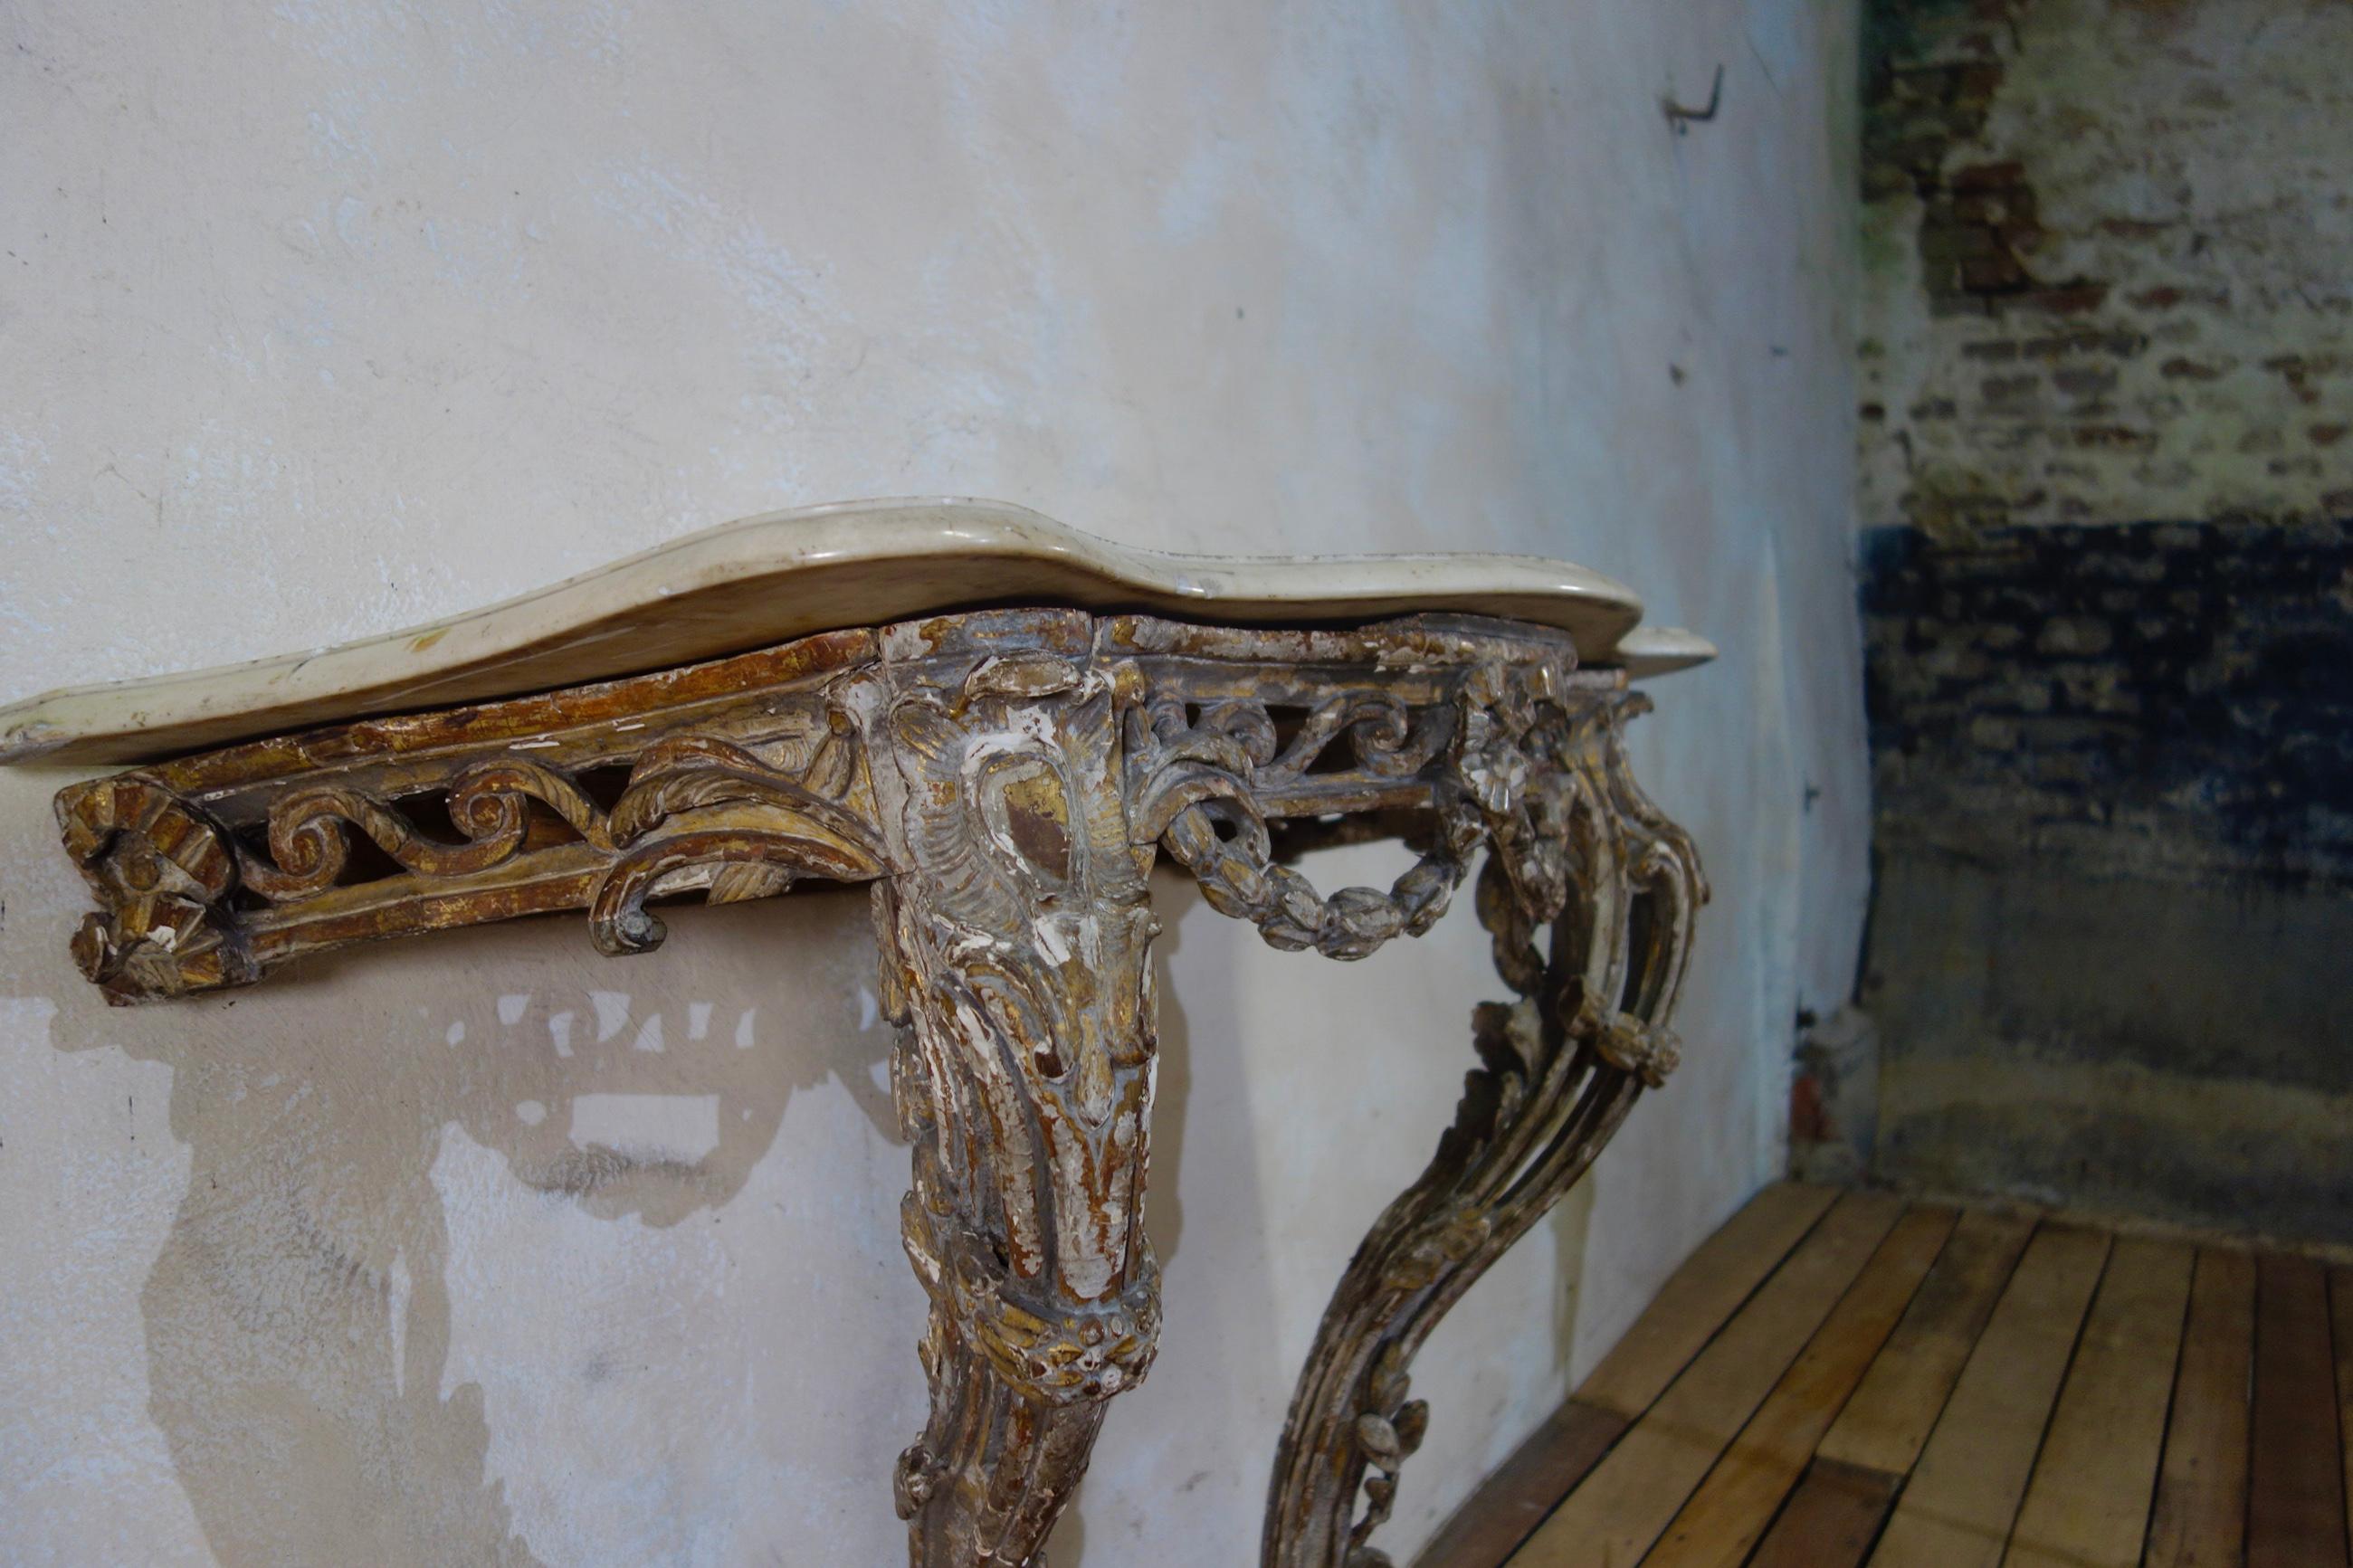 A superb 18th century French marble-topped console table. A fabulous example of 18th century craftsmanship, featuring original paintwork throughout displaying subtle blue and grey tones with original gilding to the pierced and carved base.
This